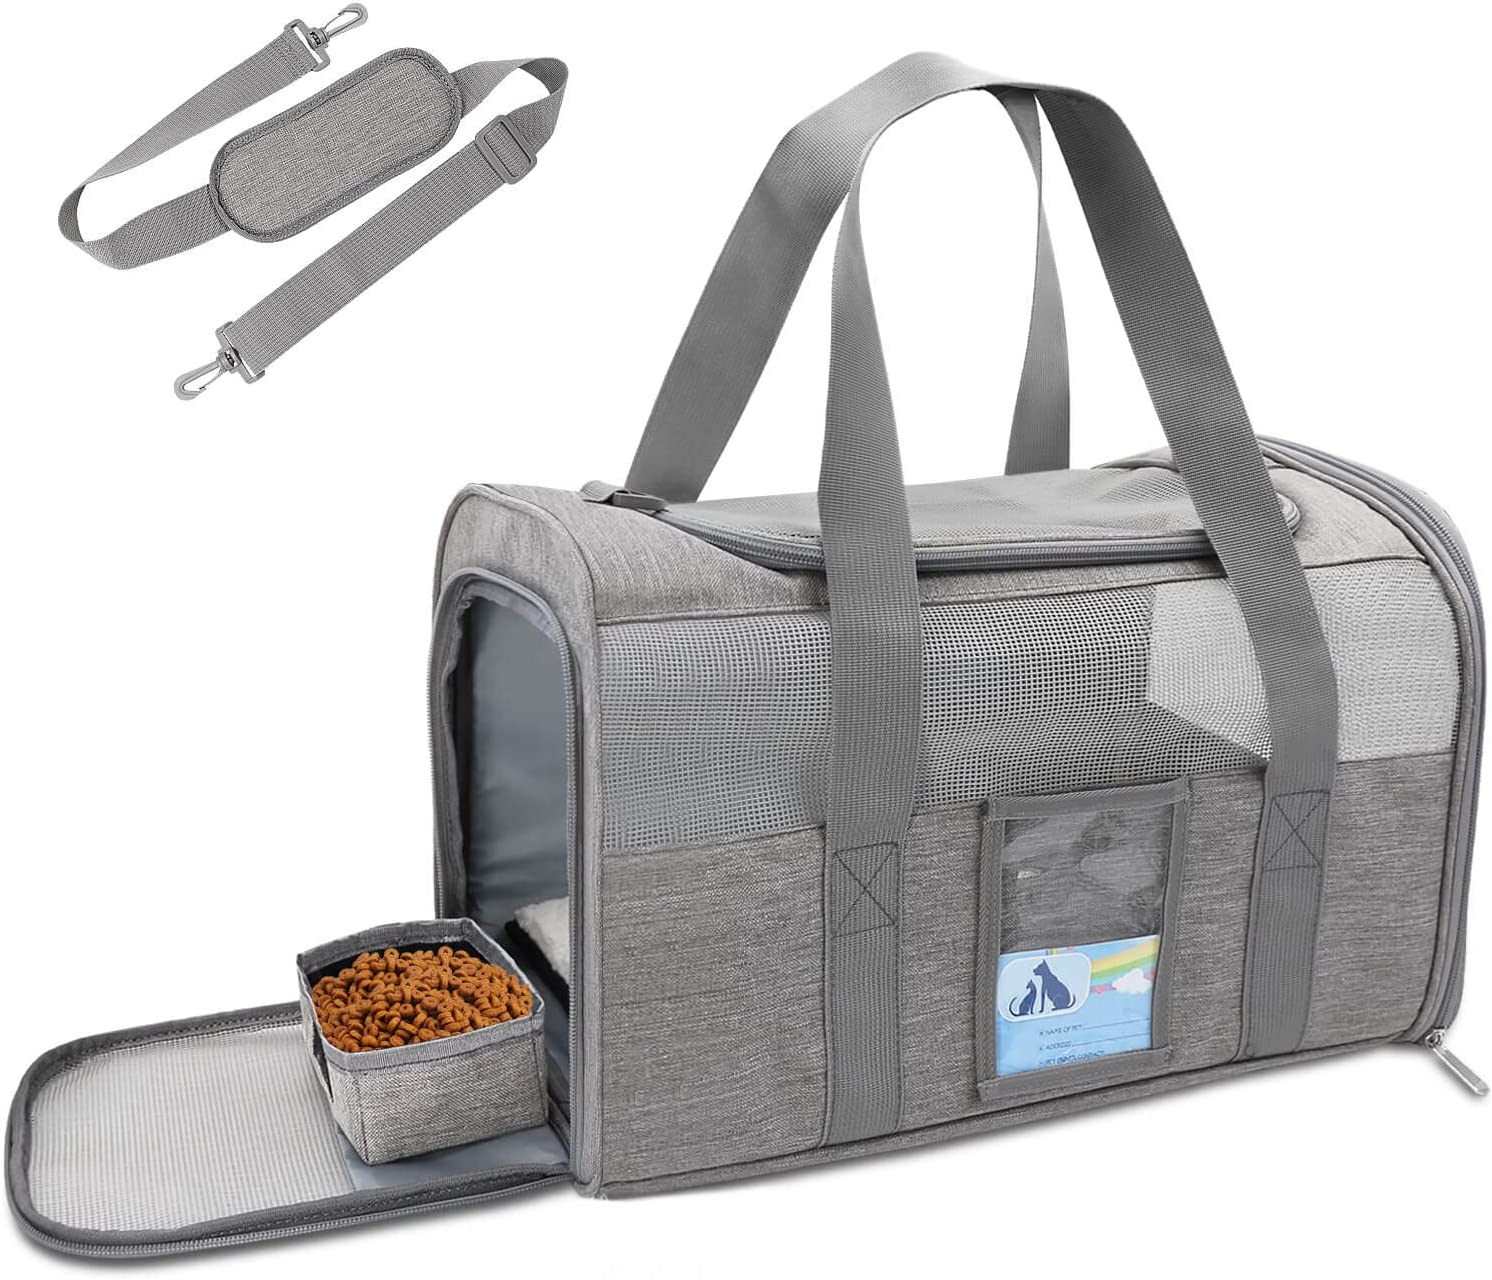 8. Refrze Pet Carrier Airline Approved